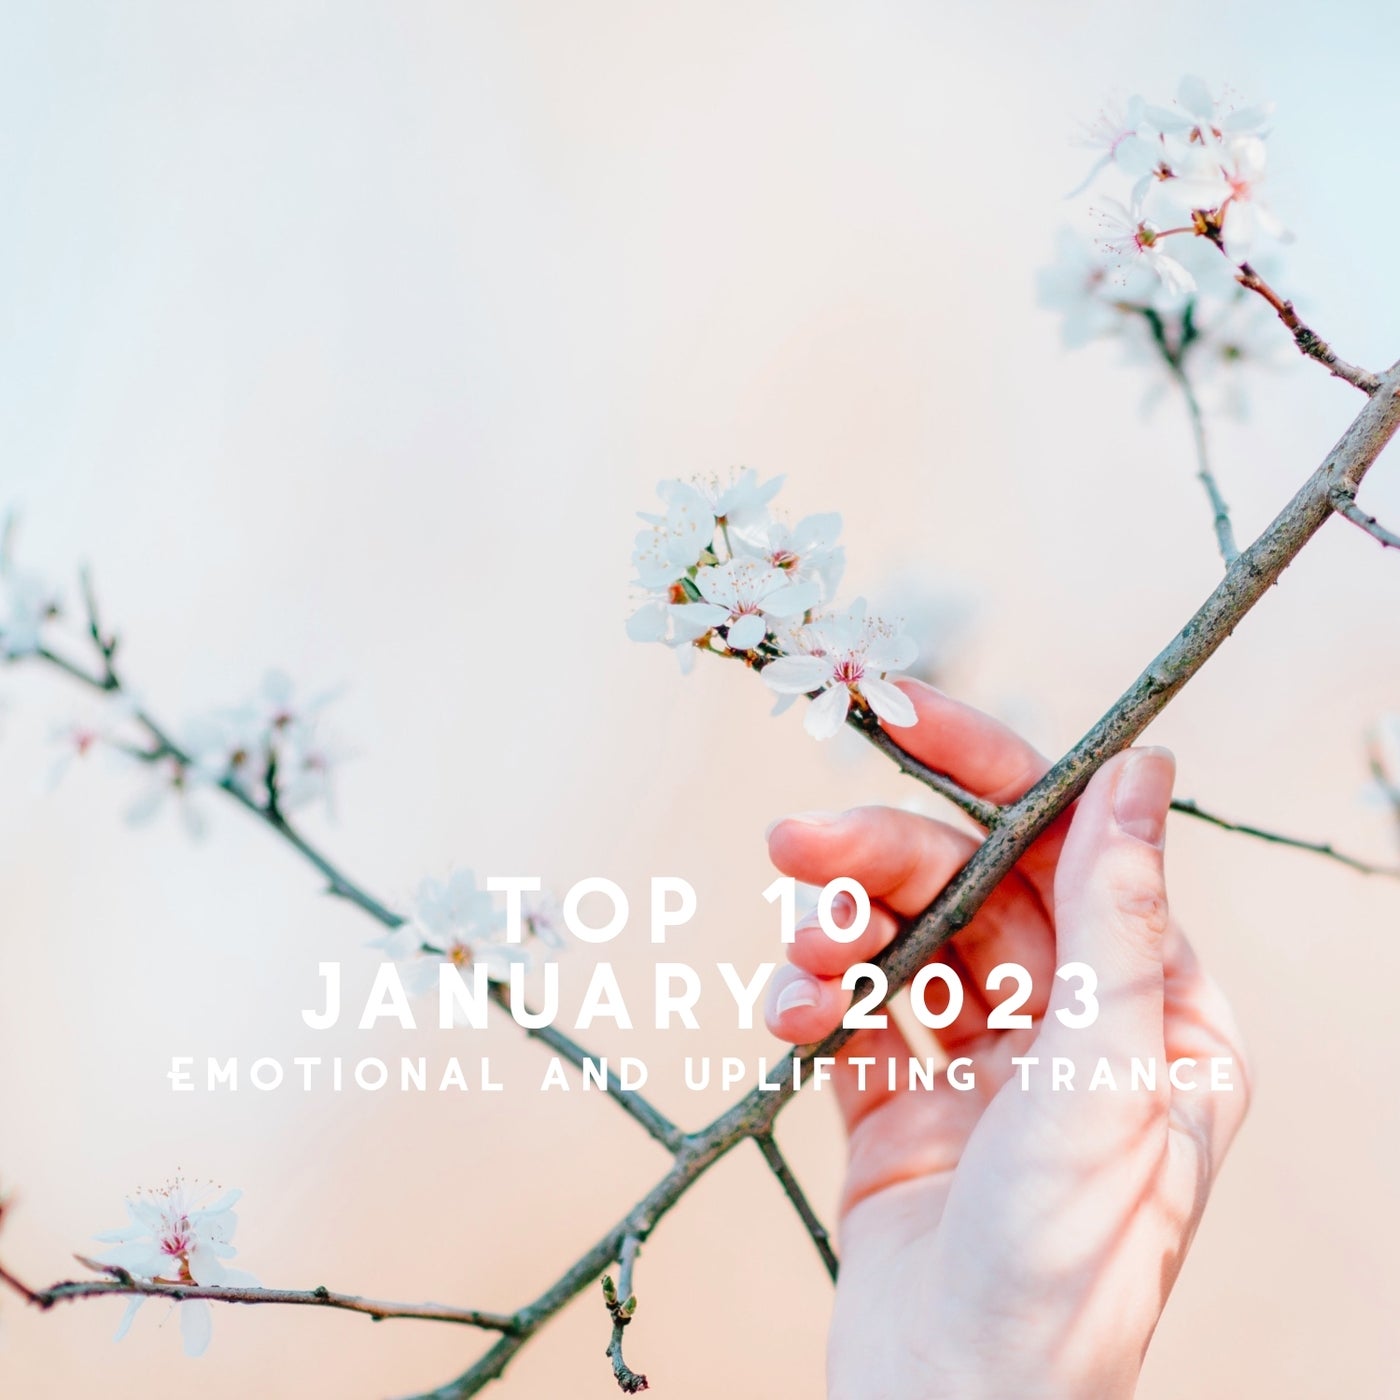 Top 10 January 2023 Emotional and Uplifting Trance